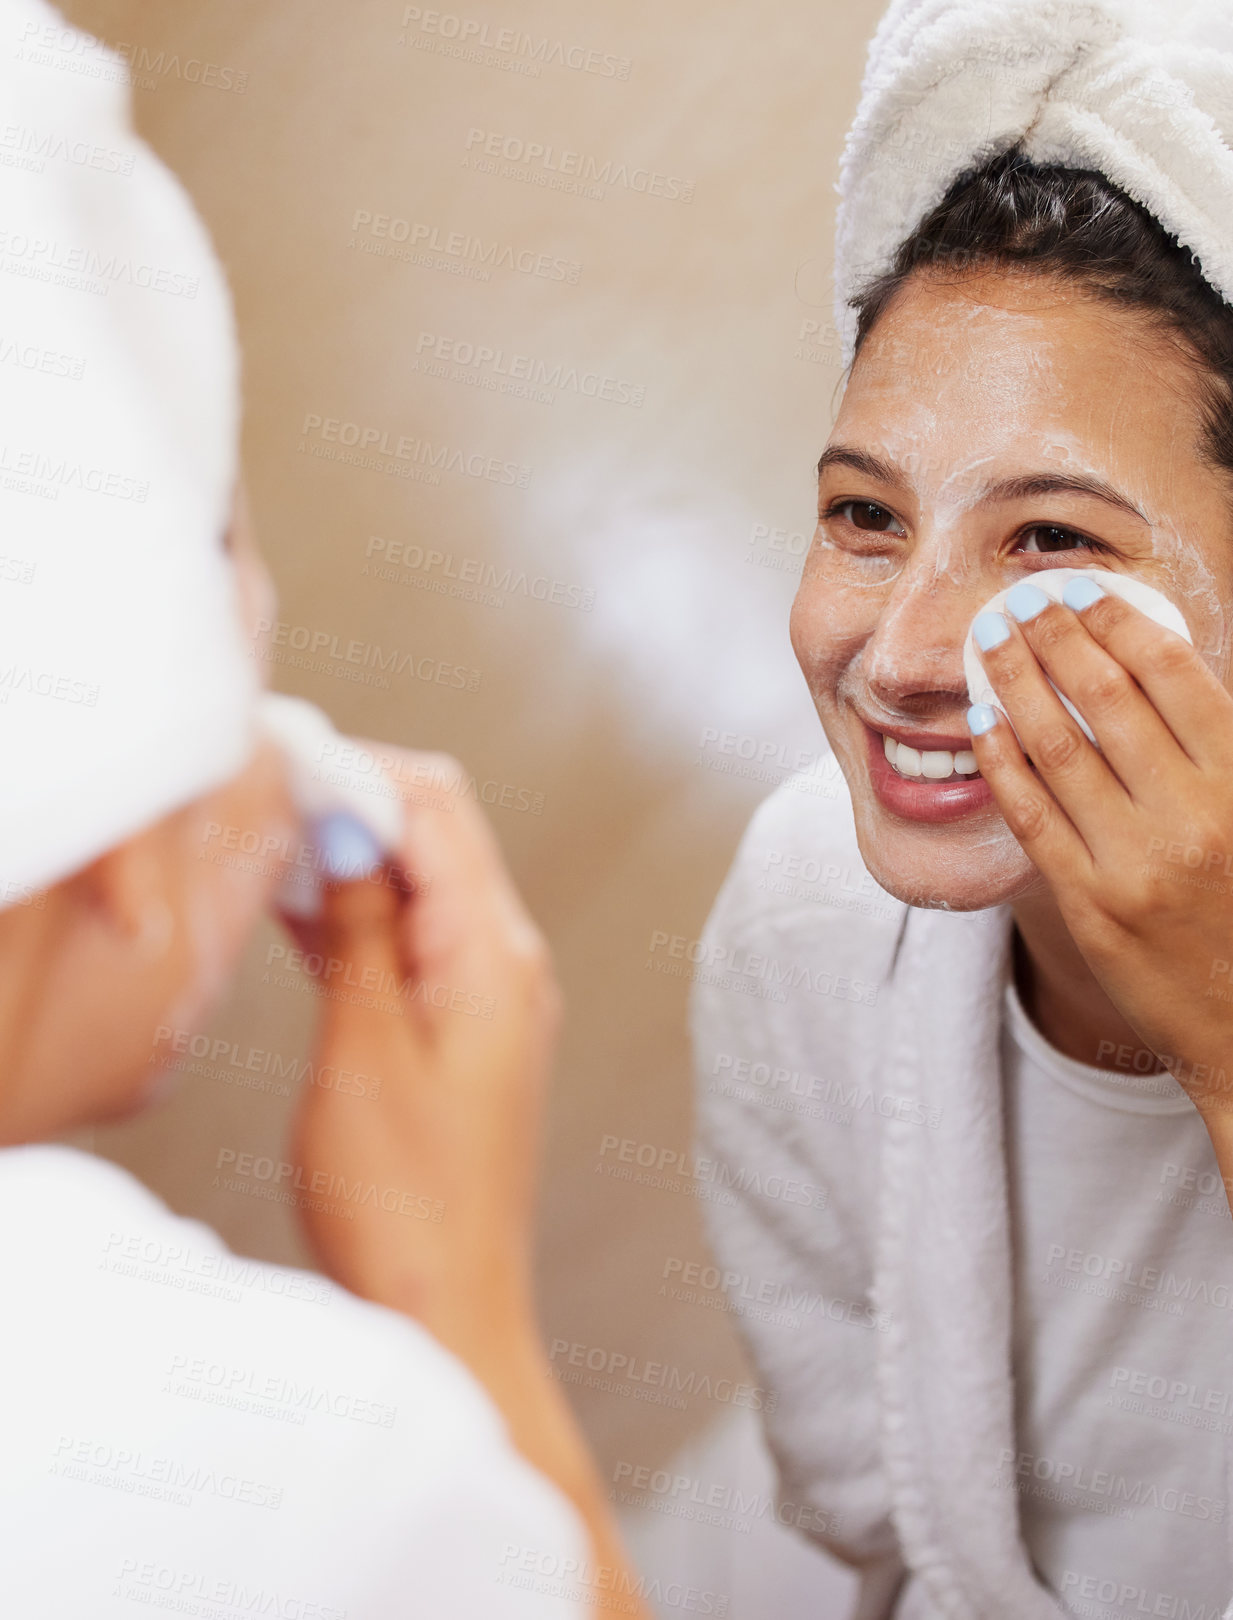 Buy stock photo Shot of a beautiful young woman looking in the mirror while cleaning her face